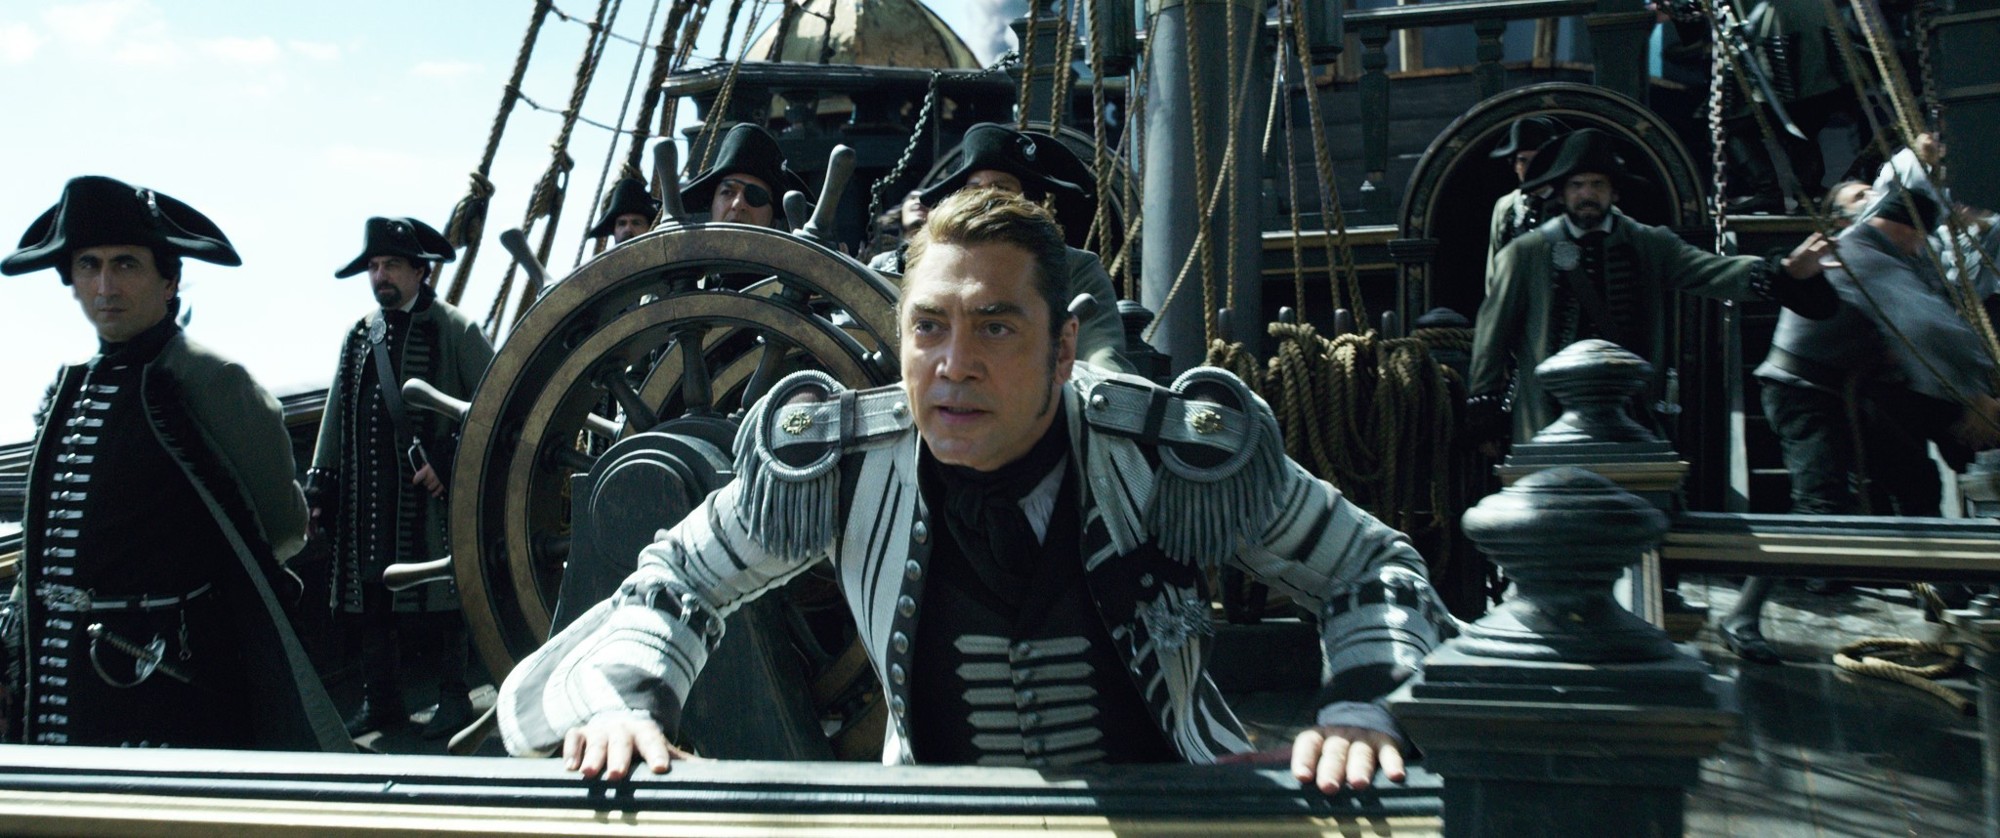 Javier Bardem stars as Captain Salazar in Walt Disney Pictures' Pirates of the Caribbean: Dead Men Tell No Tales (2017)